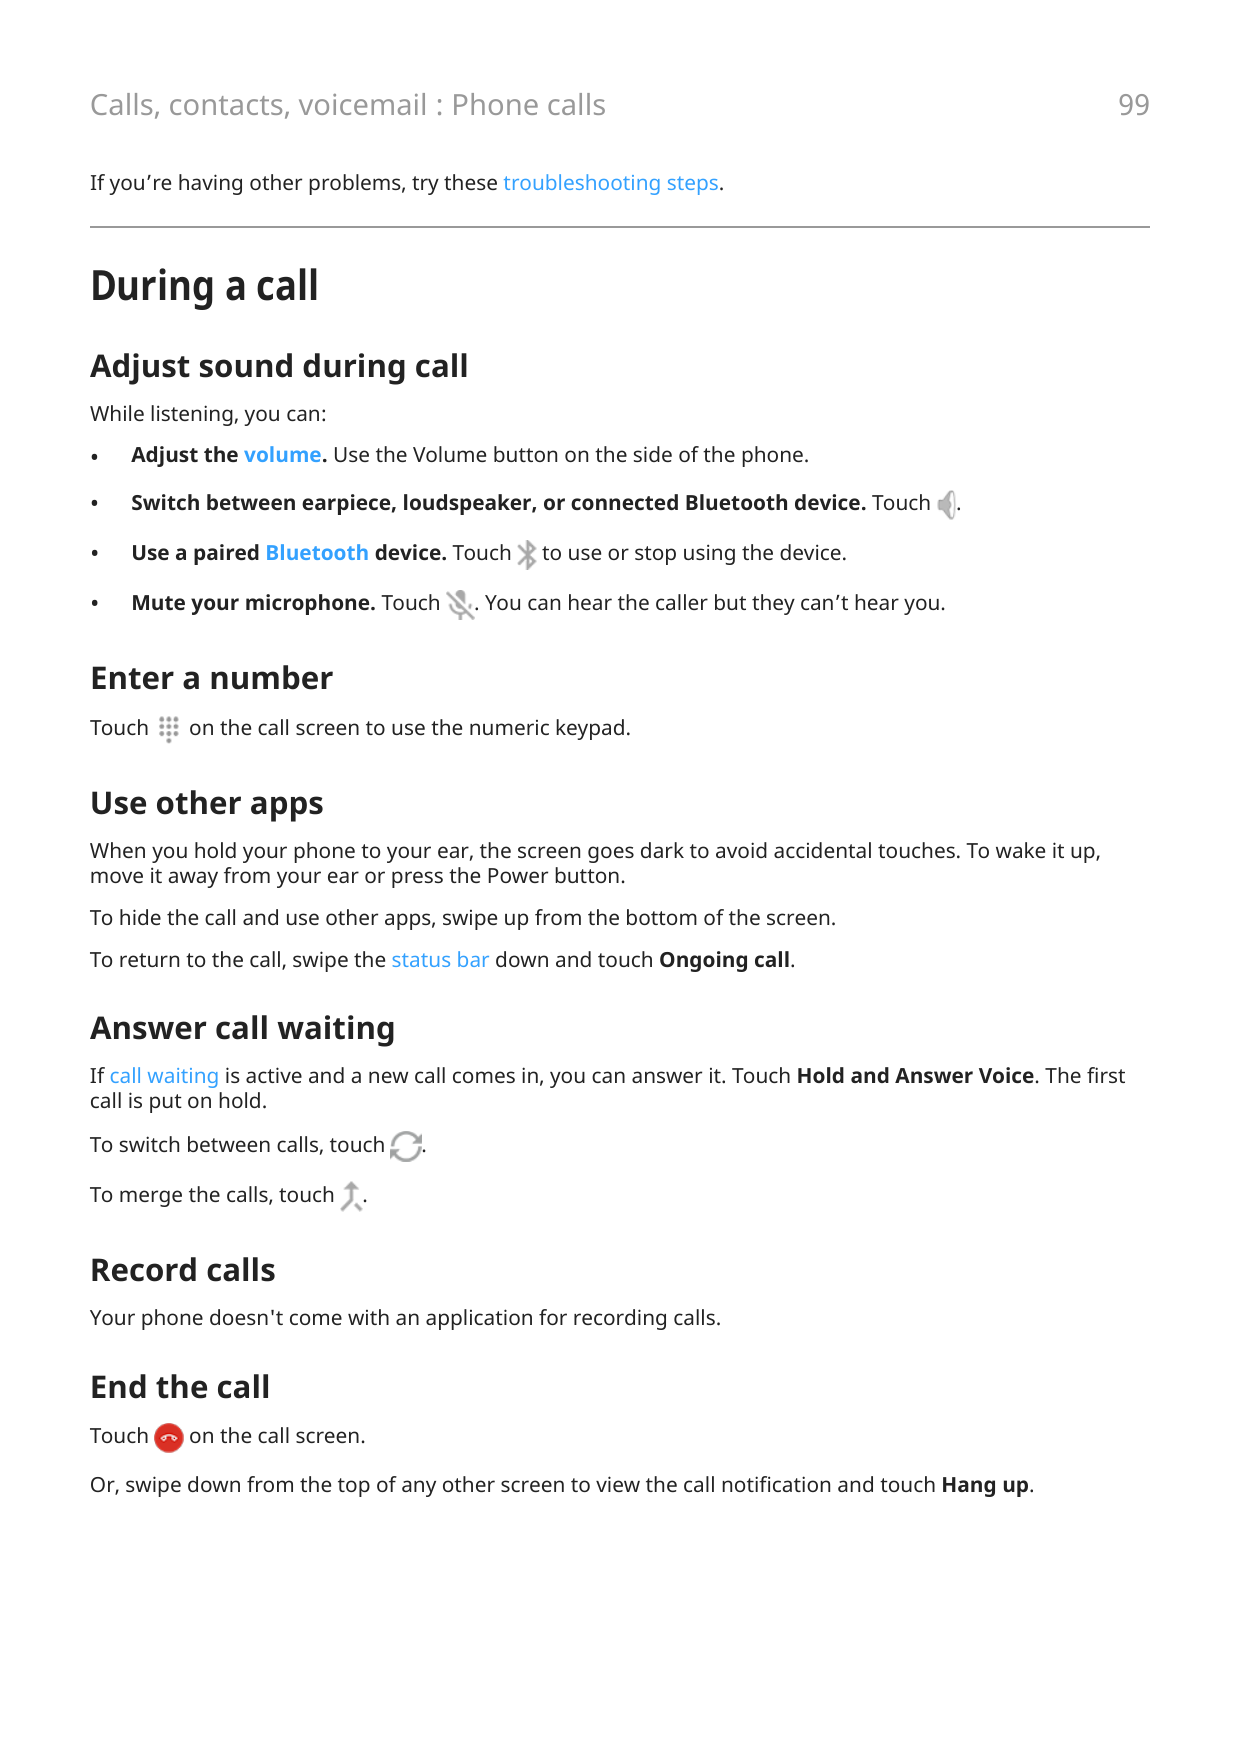 99Calls, contacts, voicemail : Phone callsIf you’re having other problems, try these troubleshooting steps.During a callAdjust s